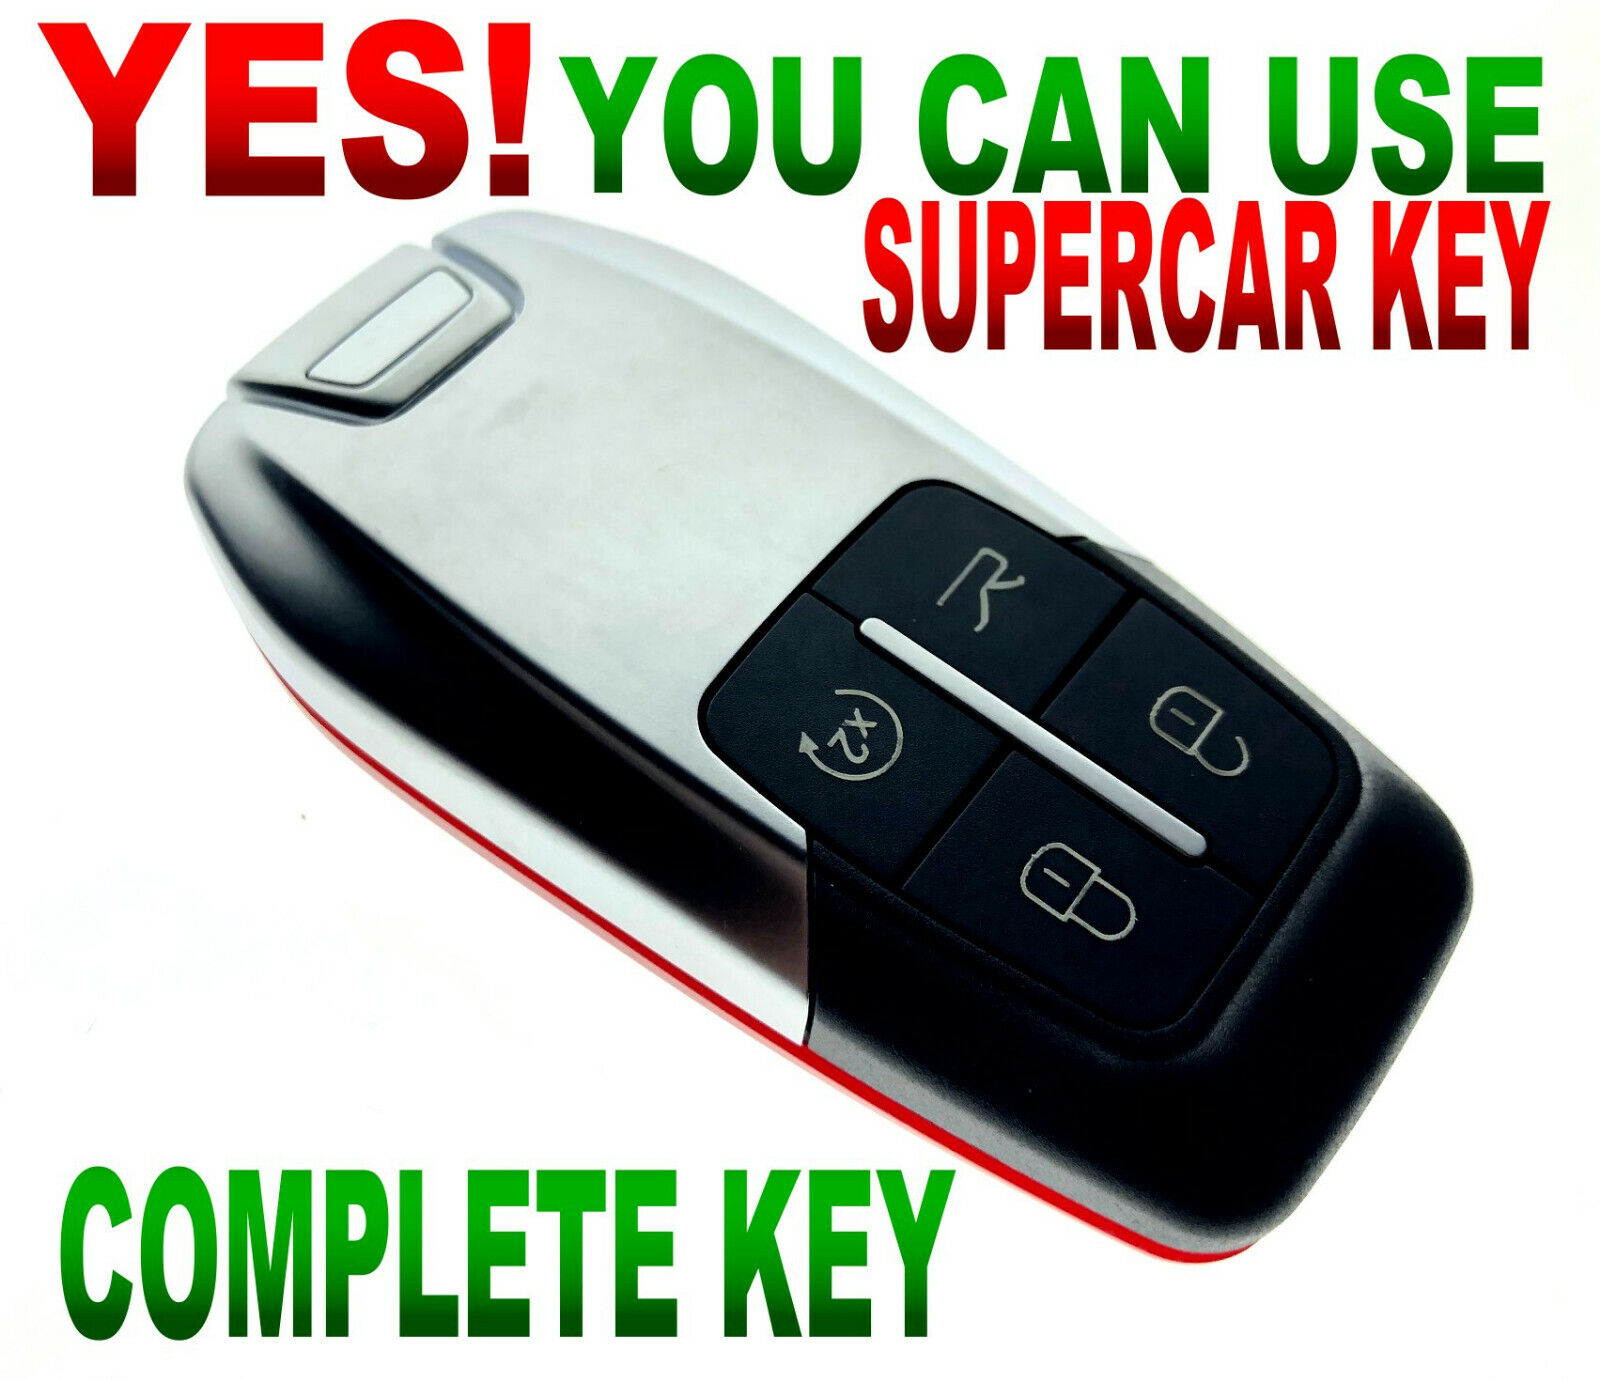 SUPERCAR KEY FOR 2015-2018 MUSTANG CHIP REMOTE SMART KEYLESS ENTRY PROX FOB RFID